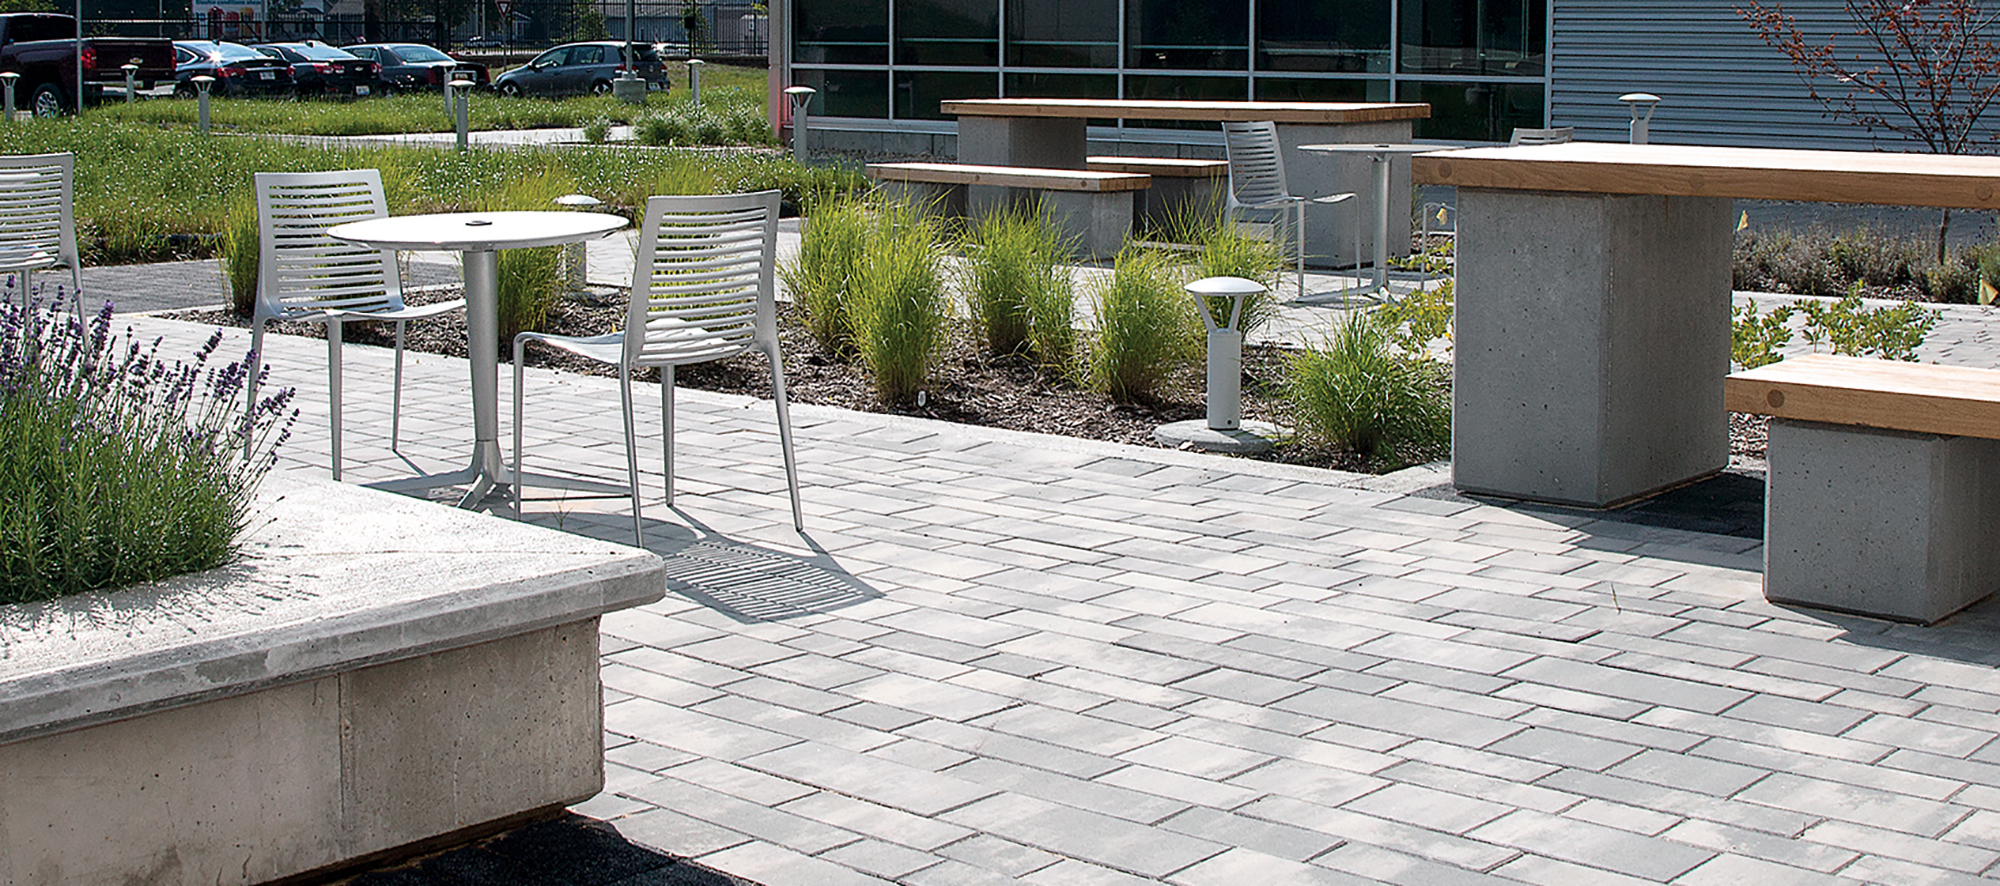 Unilock Il Campo and Artline pavers hold metal and wood tables, benches, and chairs at Holland Energy Park